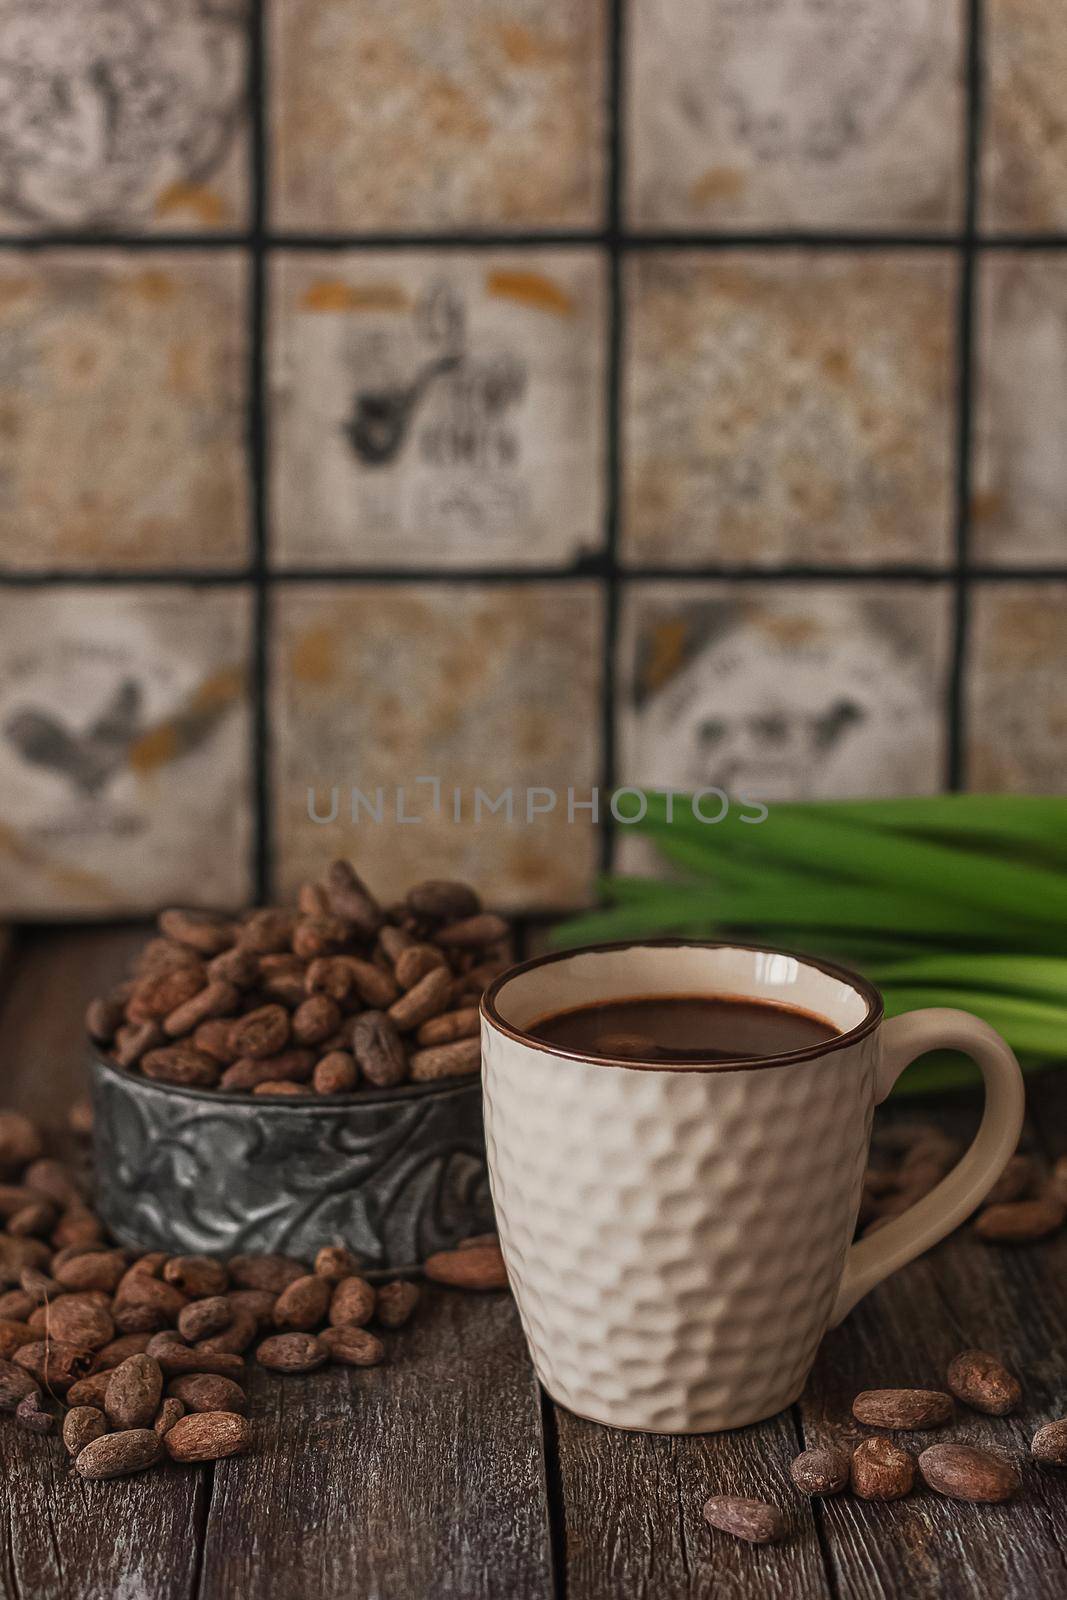 Hot chocolate drink in a white cup, chocolate cubes, cinnamon sticks and coffee bean on the dark wooden background.